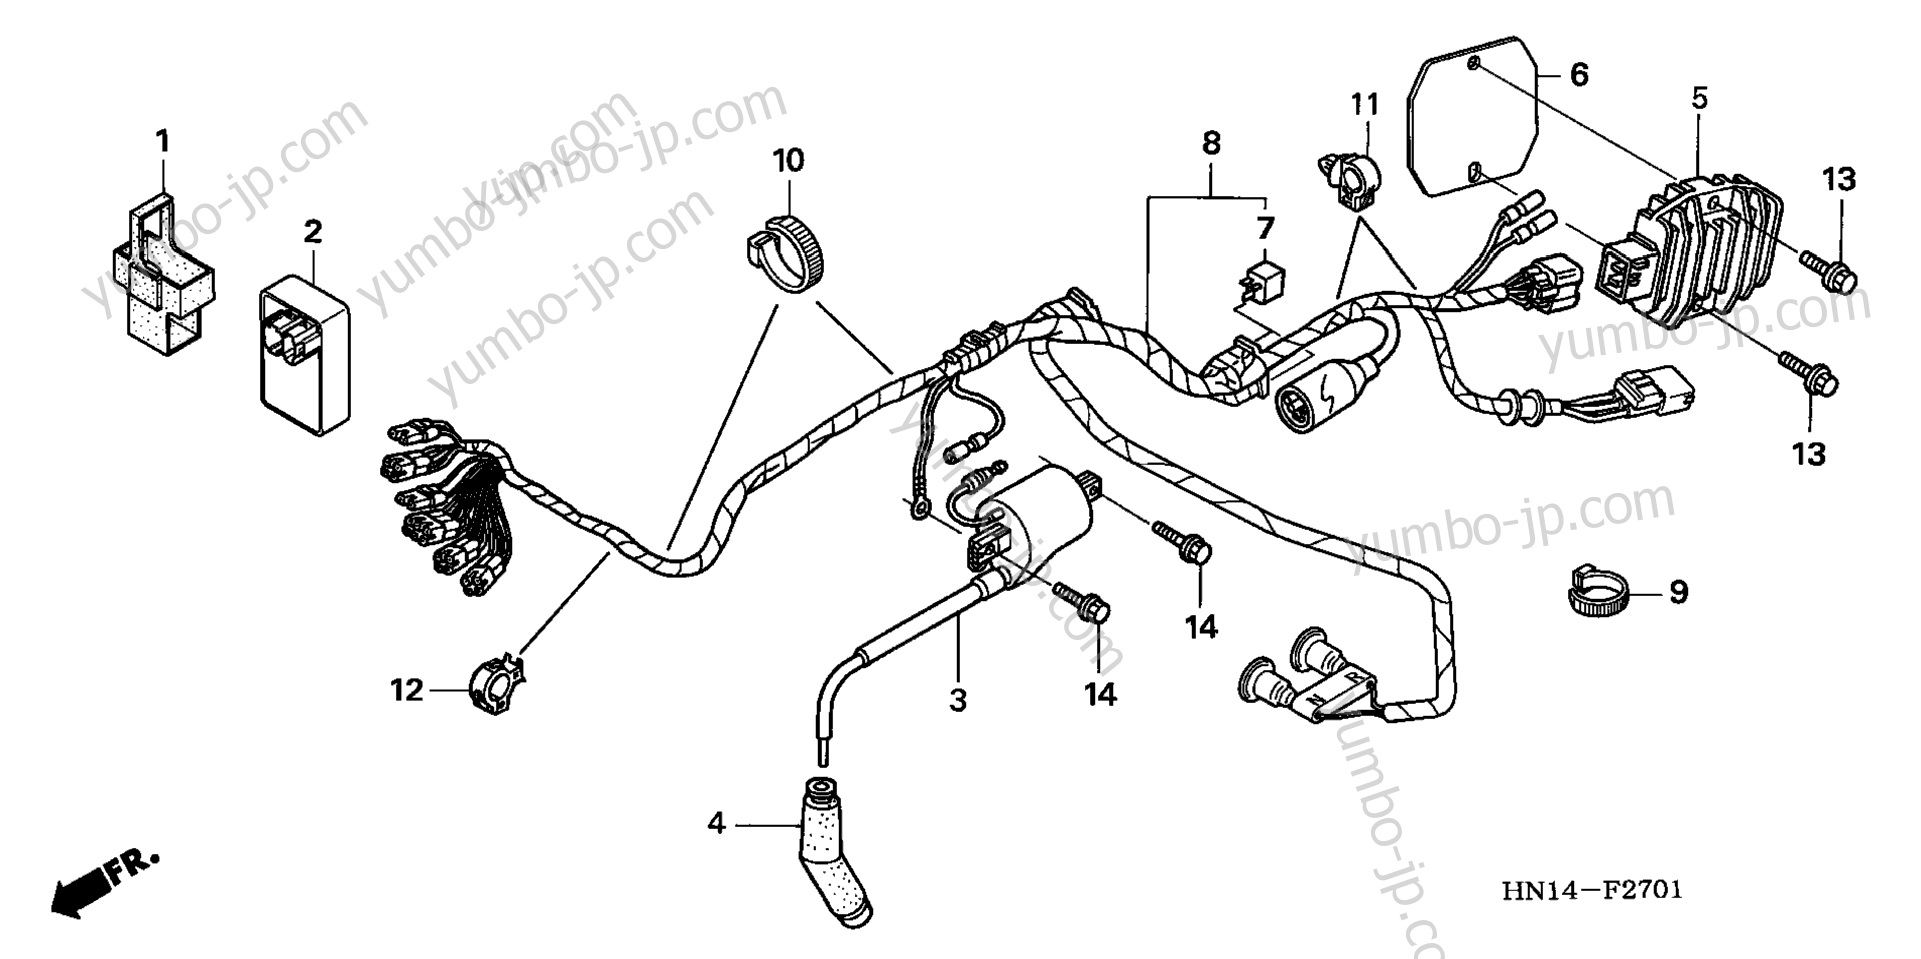 WIRE HARNESS ('05-'06) for ATVs HONDA TRX400EX A 2006 year